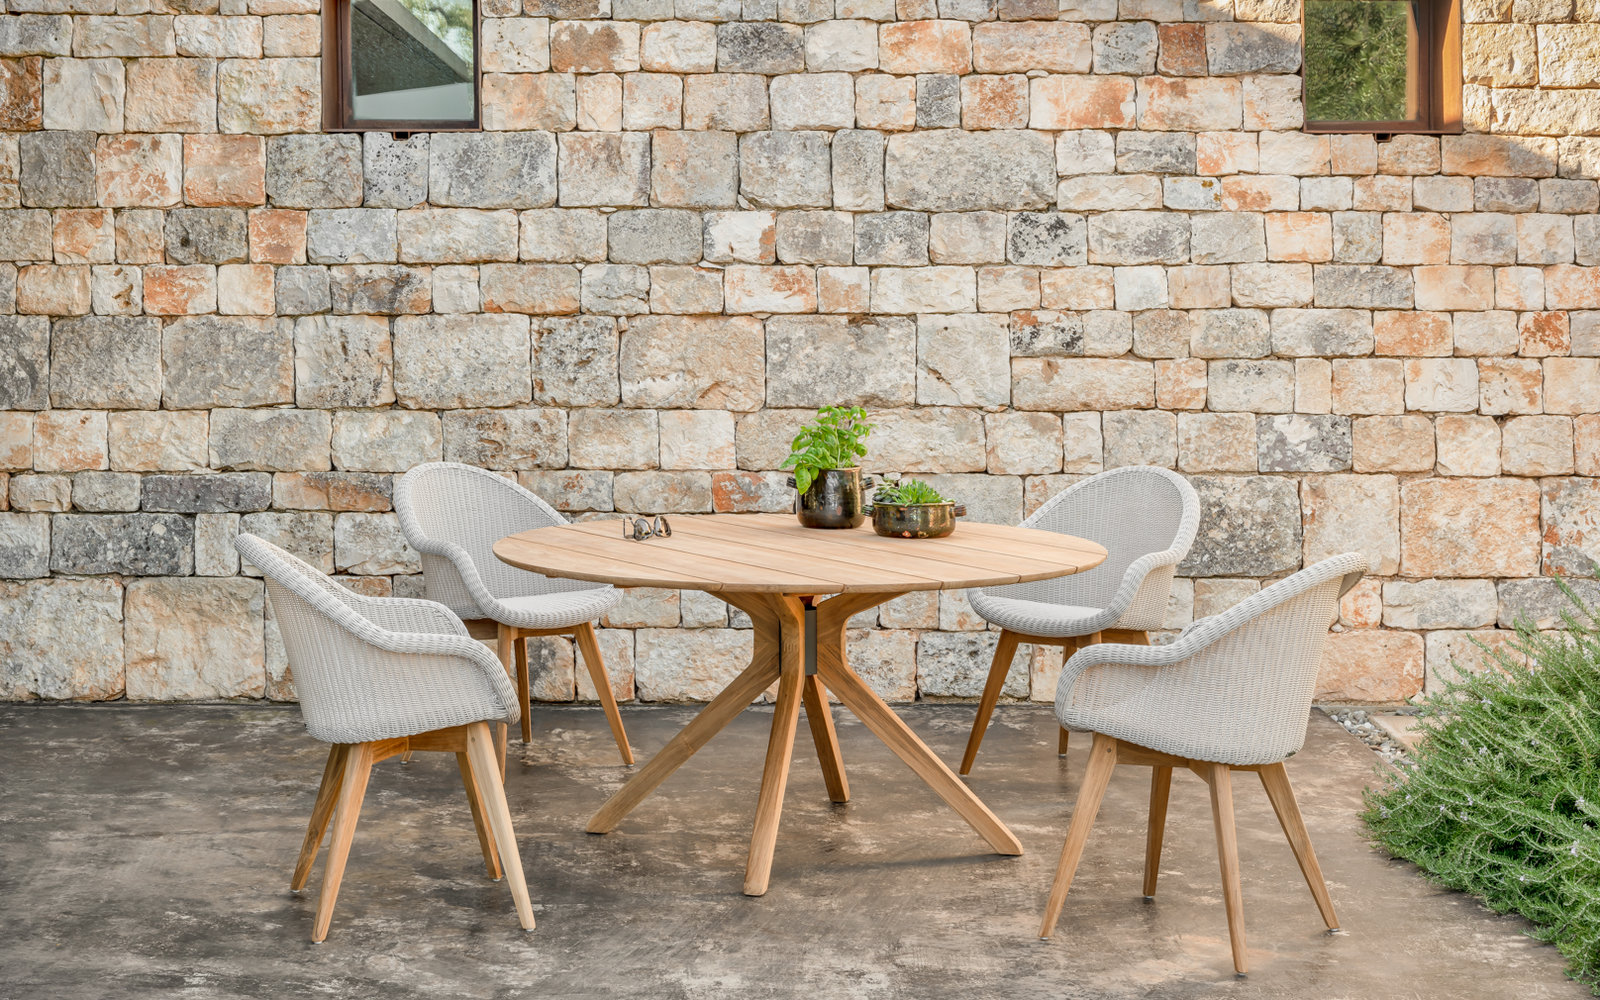 Edgard dining chairs and Noa dining table